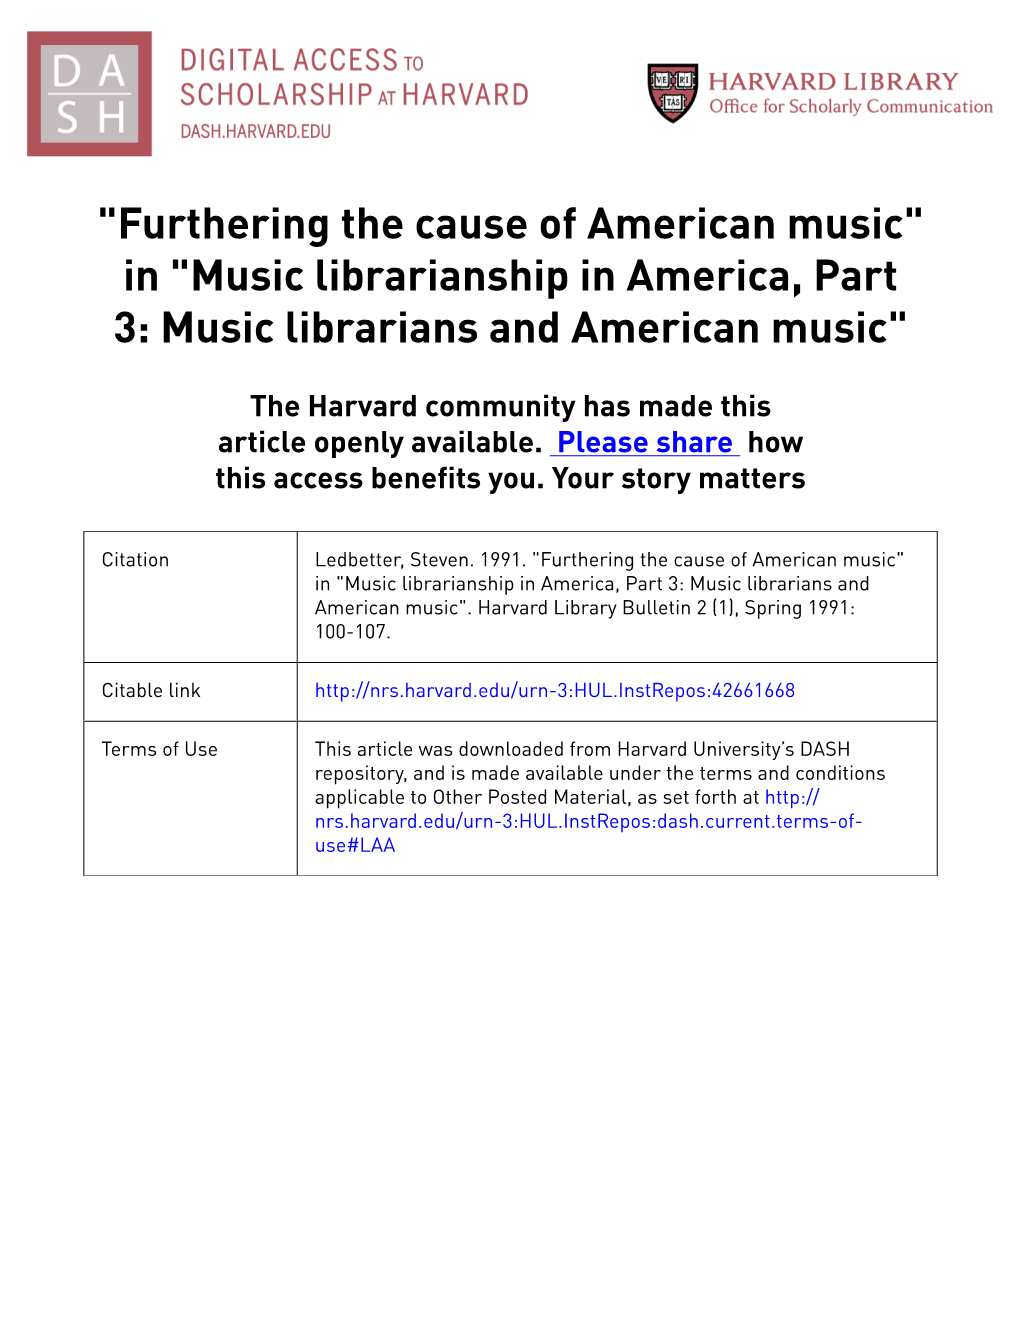 "Furthering the Cause of American Music" in "Music Librarianship in America, Part 3: Music Librarians and American Music"